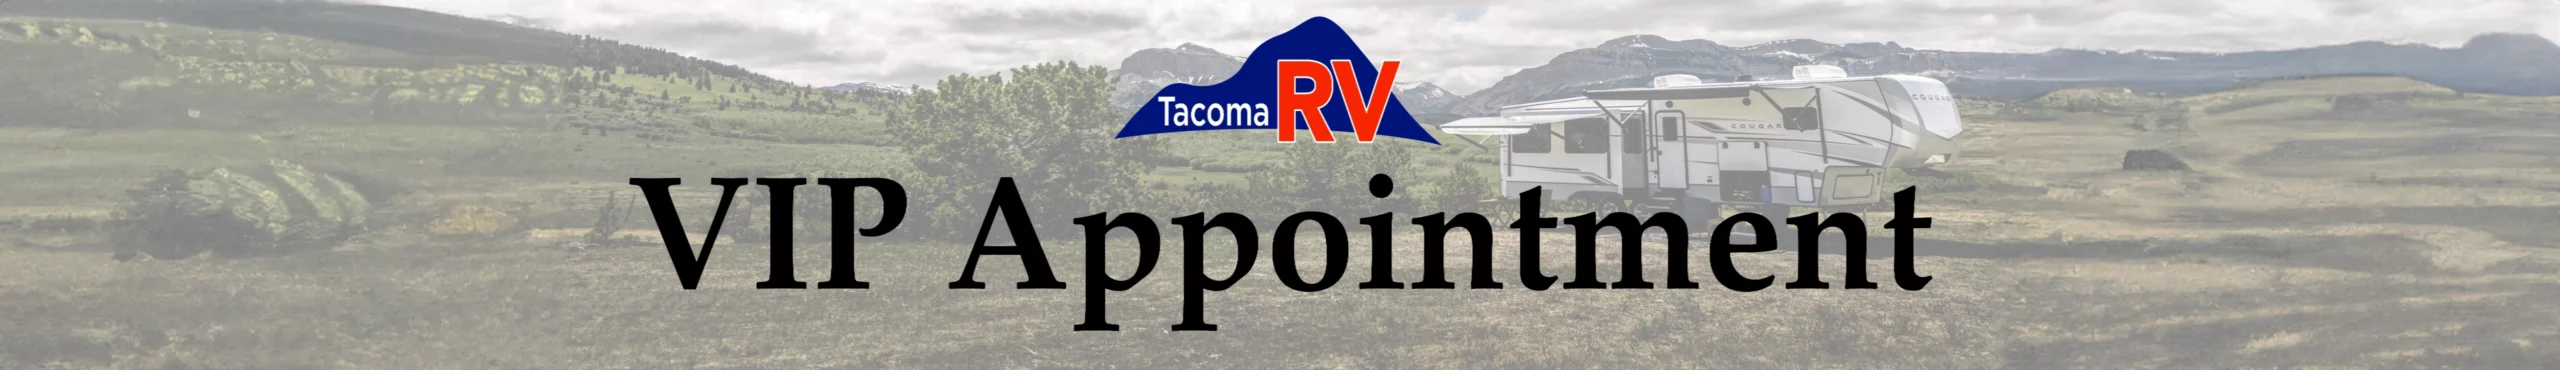 Schedule your VIP appointment at Tacoma RV.